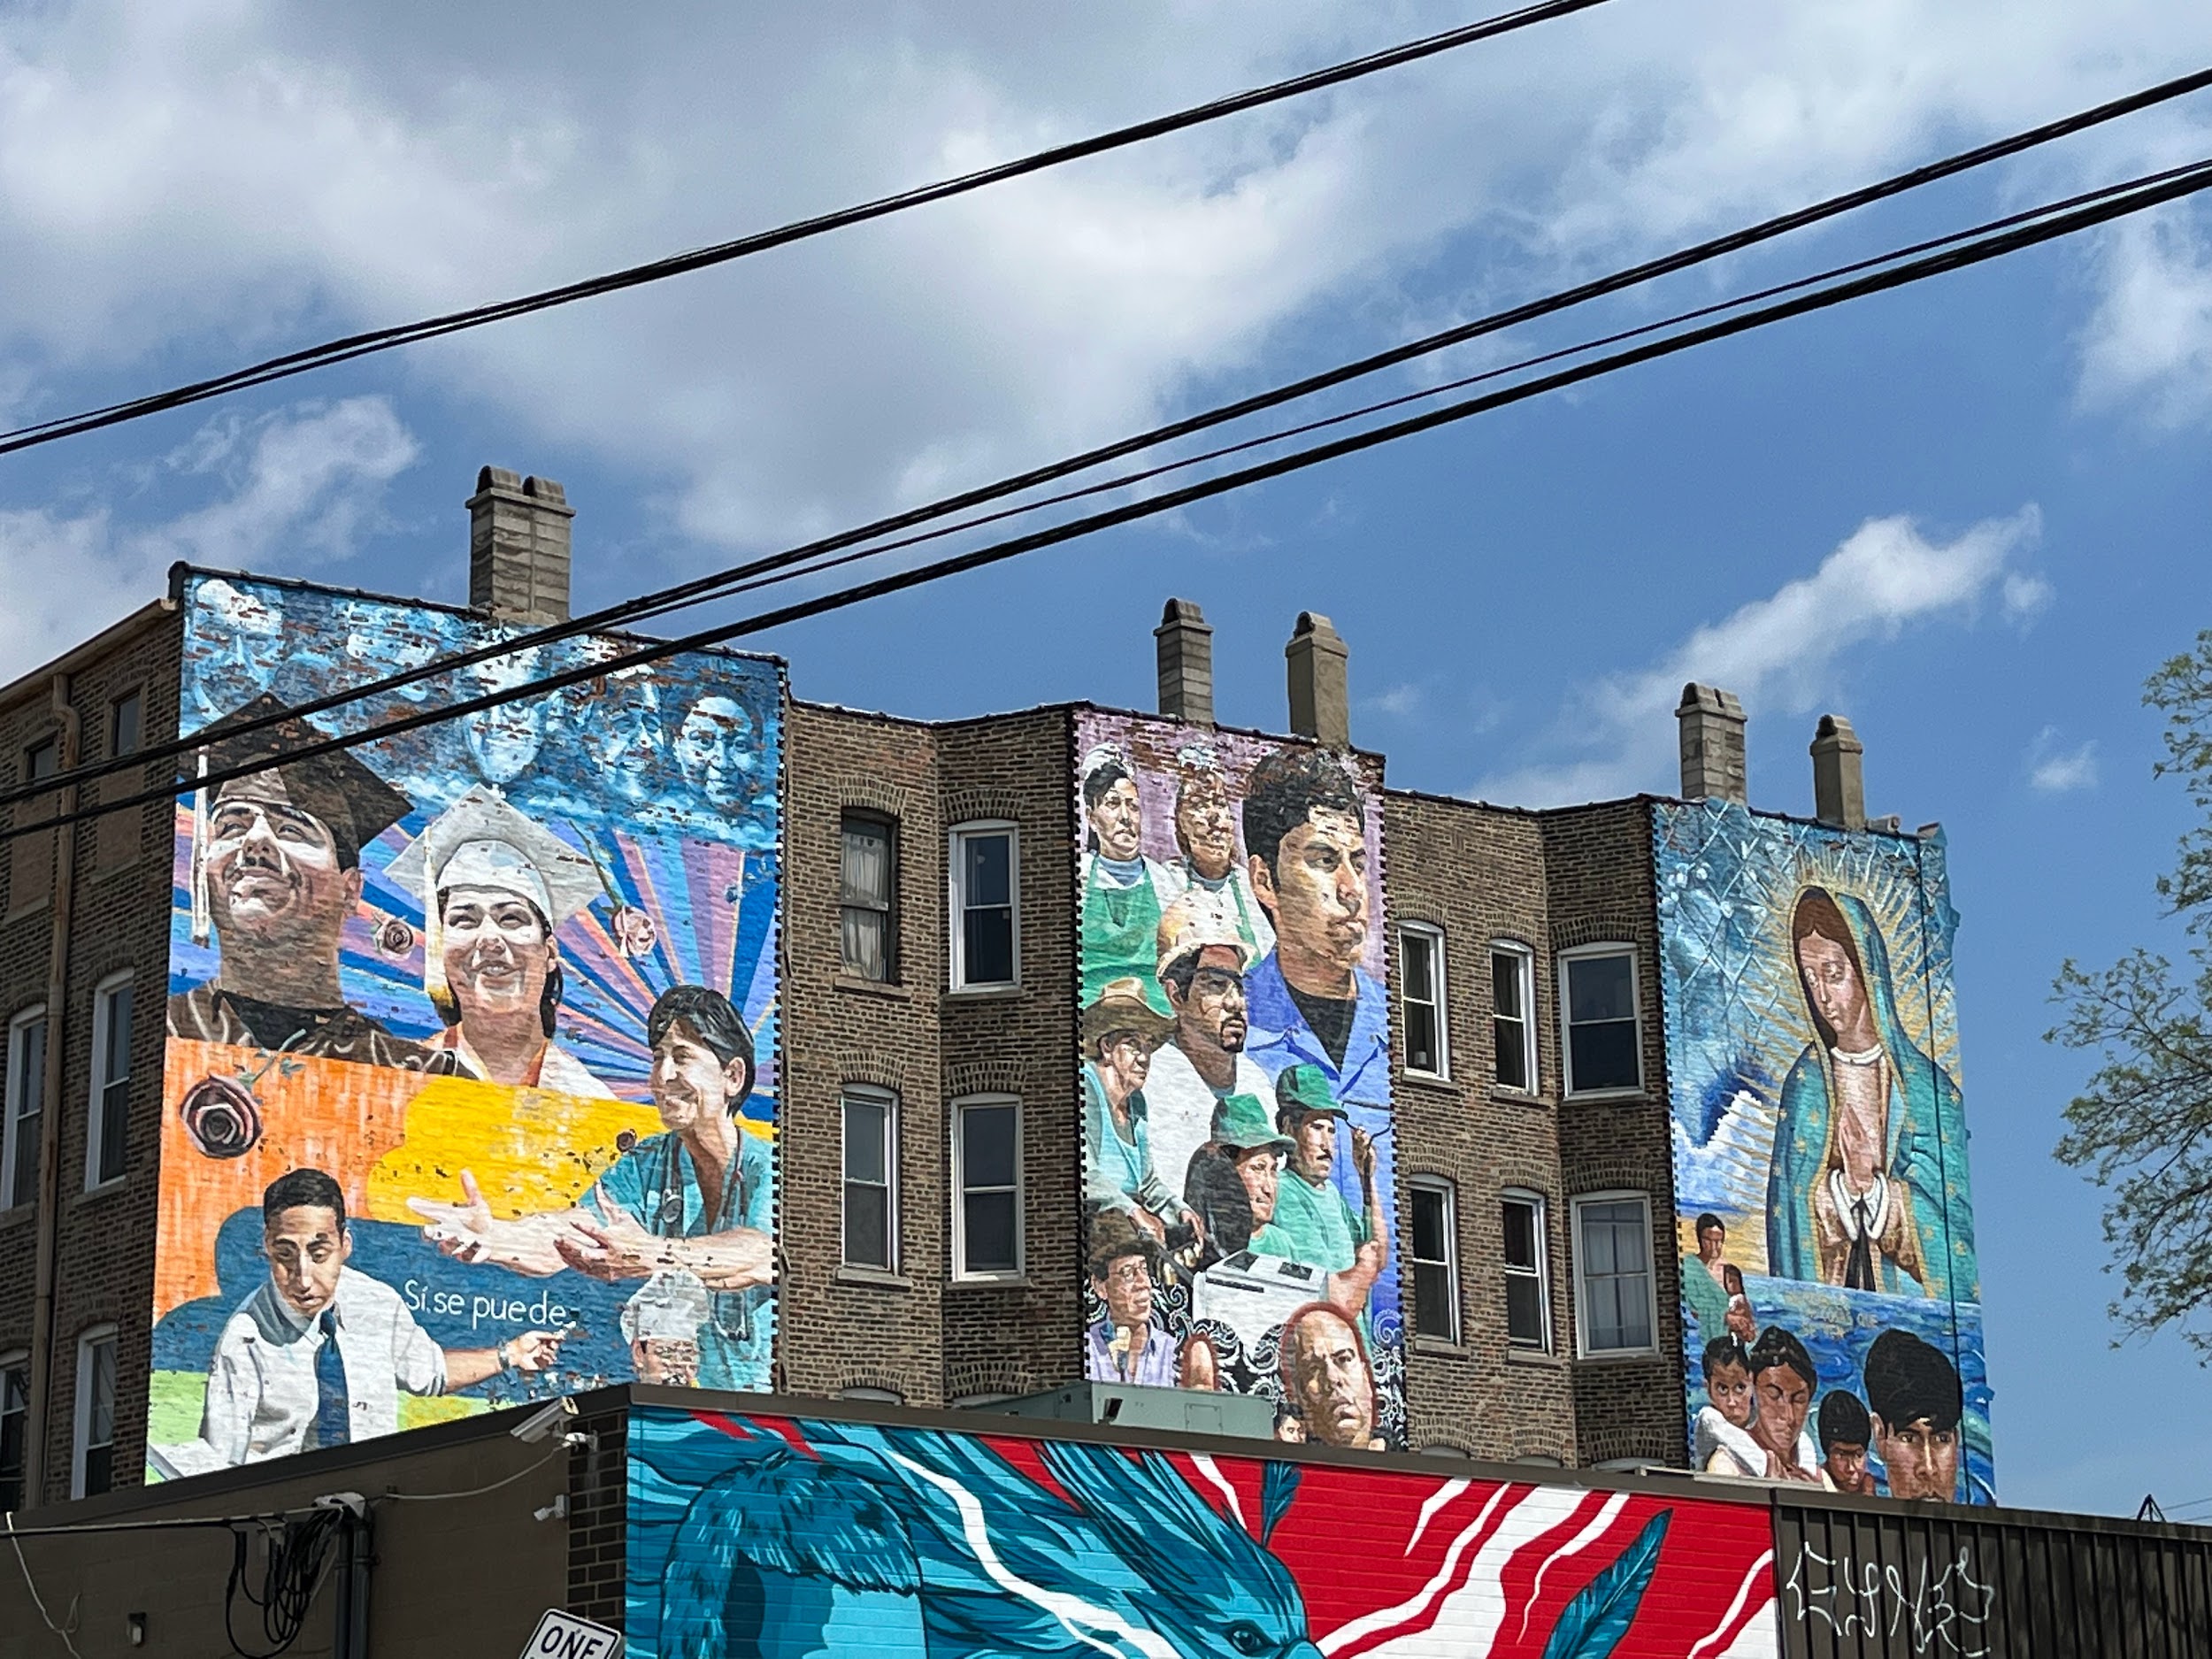 Alt text: This mural is “Las Cosas Q’Se Ven, three separate panels painted on the side of one building. On the first panel, two young graduates are smiling, with Latino historical figures above them. Below, a smiling doctor stretches out her hands, while a teacher chalks the words “Si, se puede” Yes, we can. A chef smiles below. In the middle panel, multiple people representing the working class community turned to the right, facing the last panel. The right-most panel depicts a large-scale painting of the Virgin of Guadalupe watching over immigrants sailing across the sea to the United States. Behind her, a man with his eyes closed grasps at a chainlink fence.